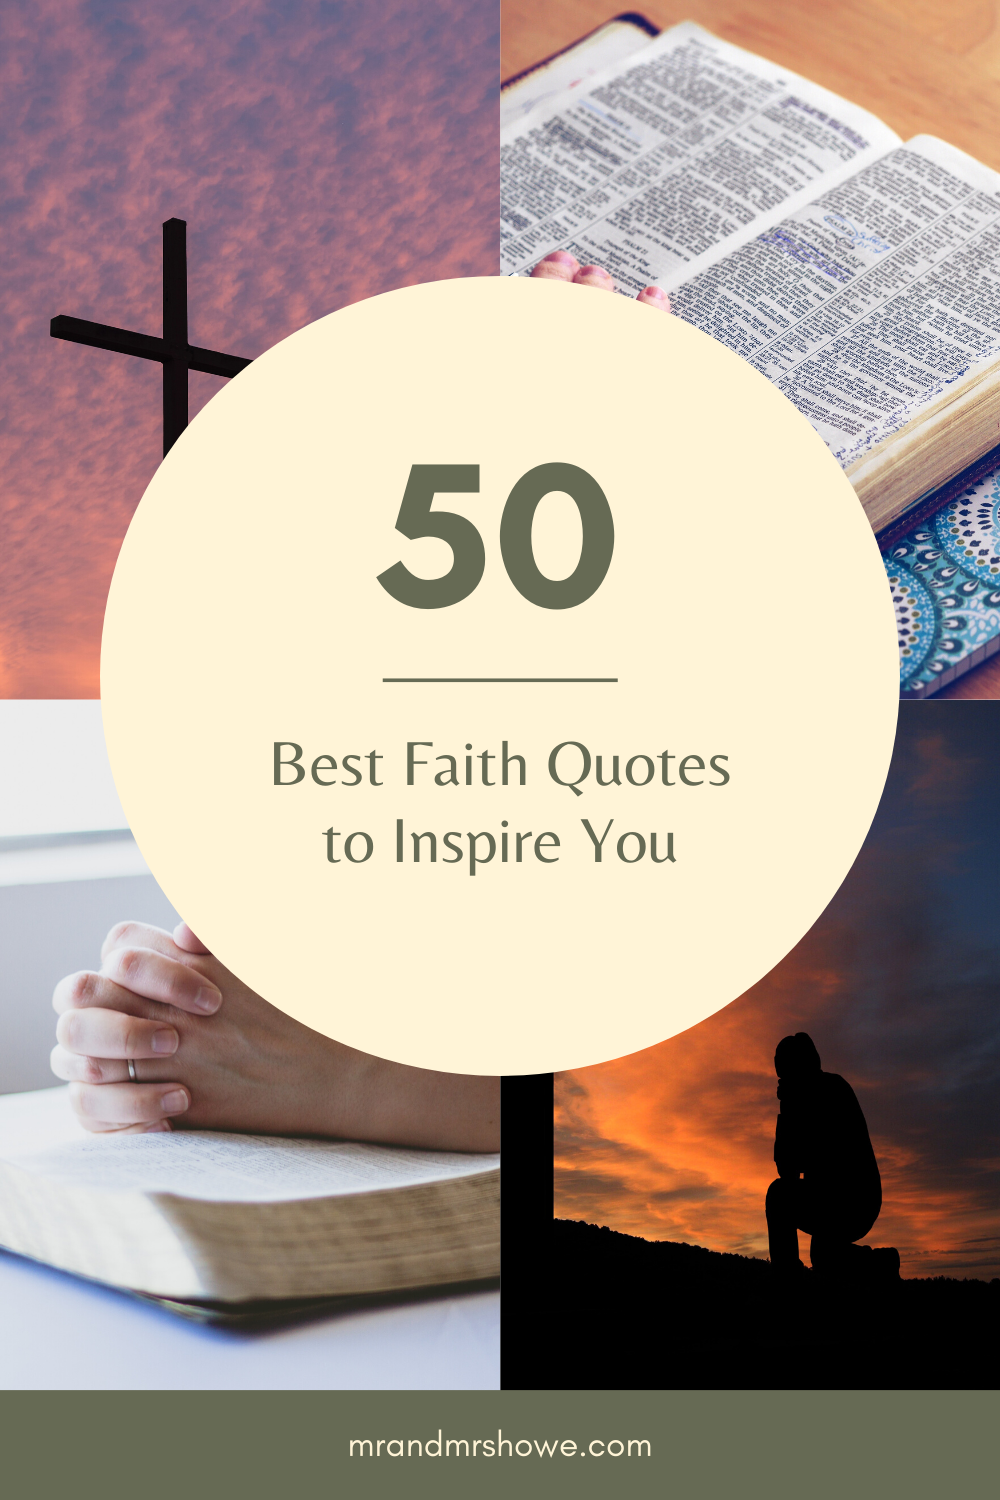 50 Best Faith Quotes to Inspire You 1.png